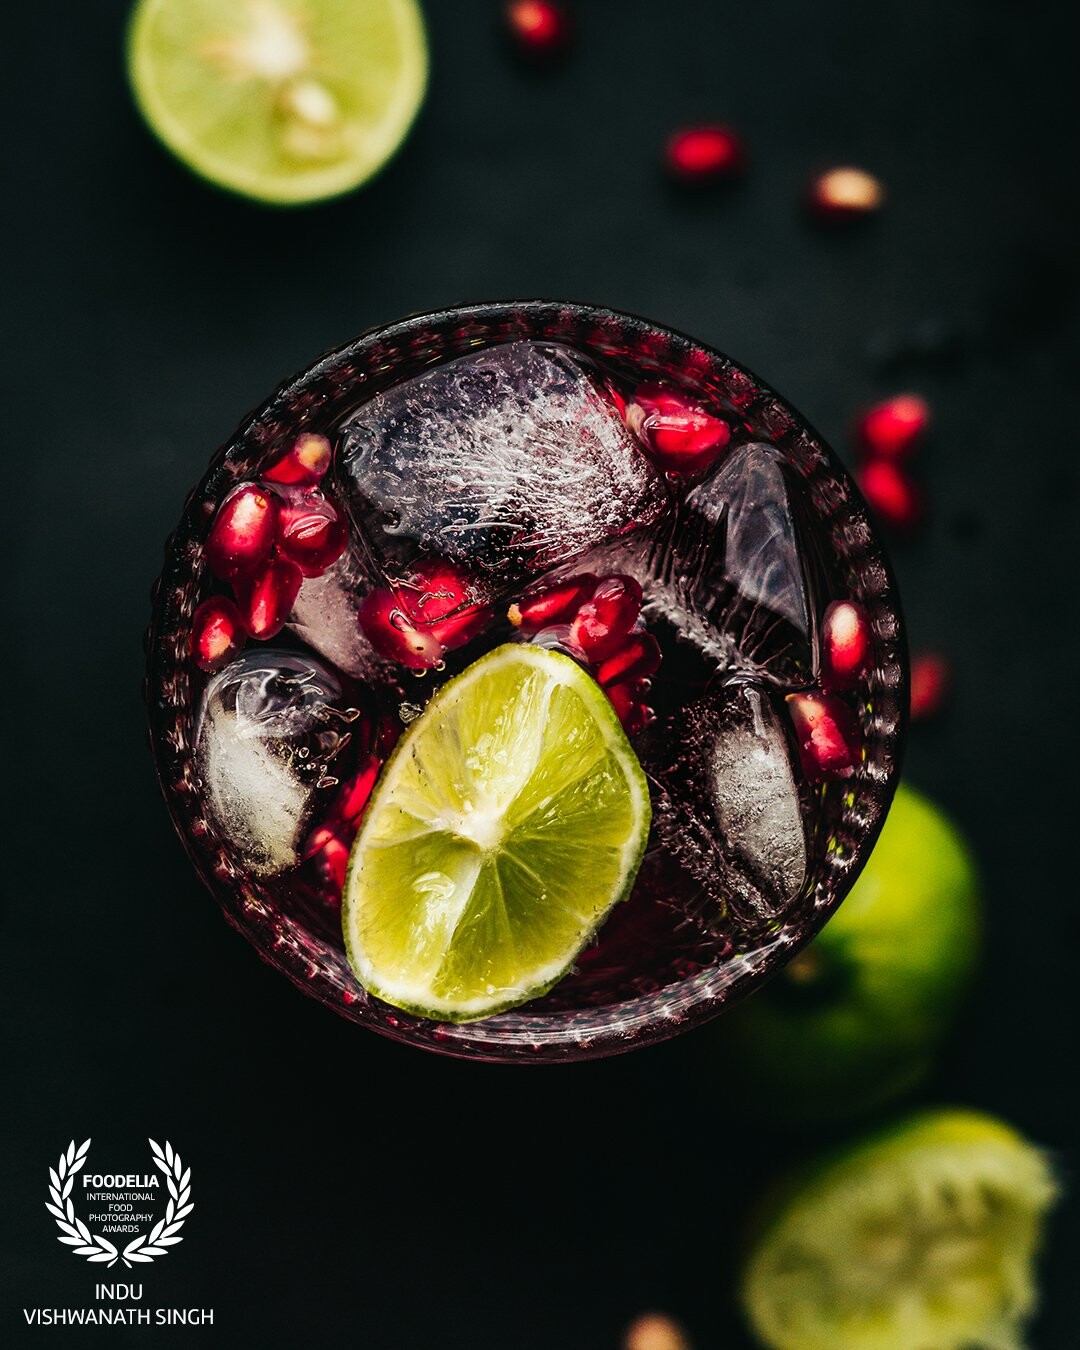 One of my favourite summer drinks, Pom Smash Cocktail! I wanted to capture the details the ice, ingredients of the drink and contrasts on the colors! <br />
Primary Gear : Sony Alpha, Godox Lighting